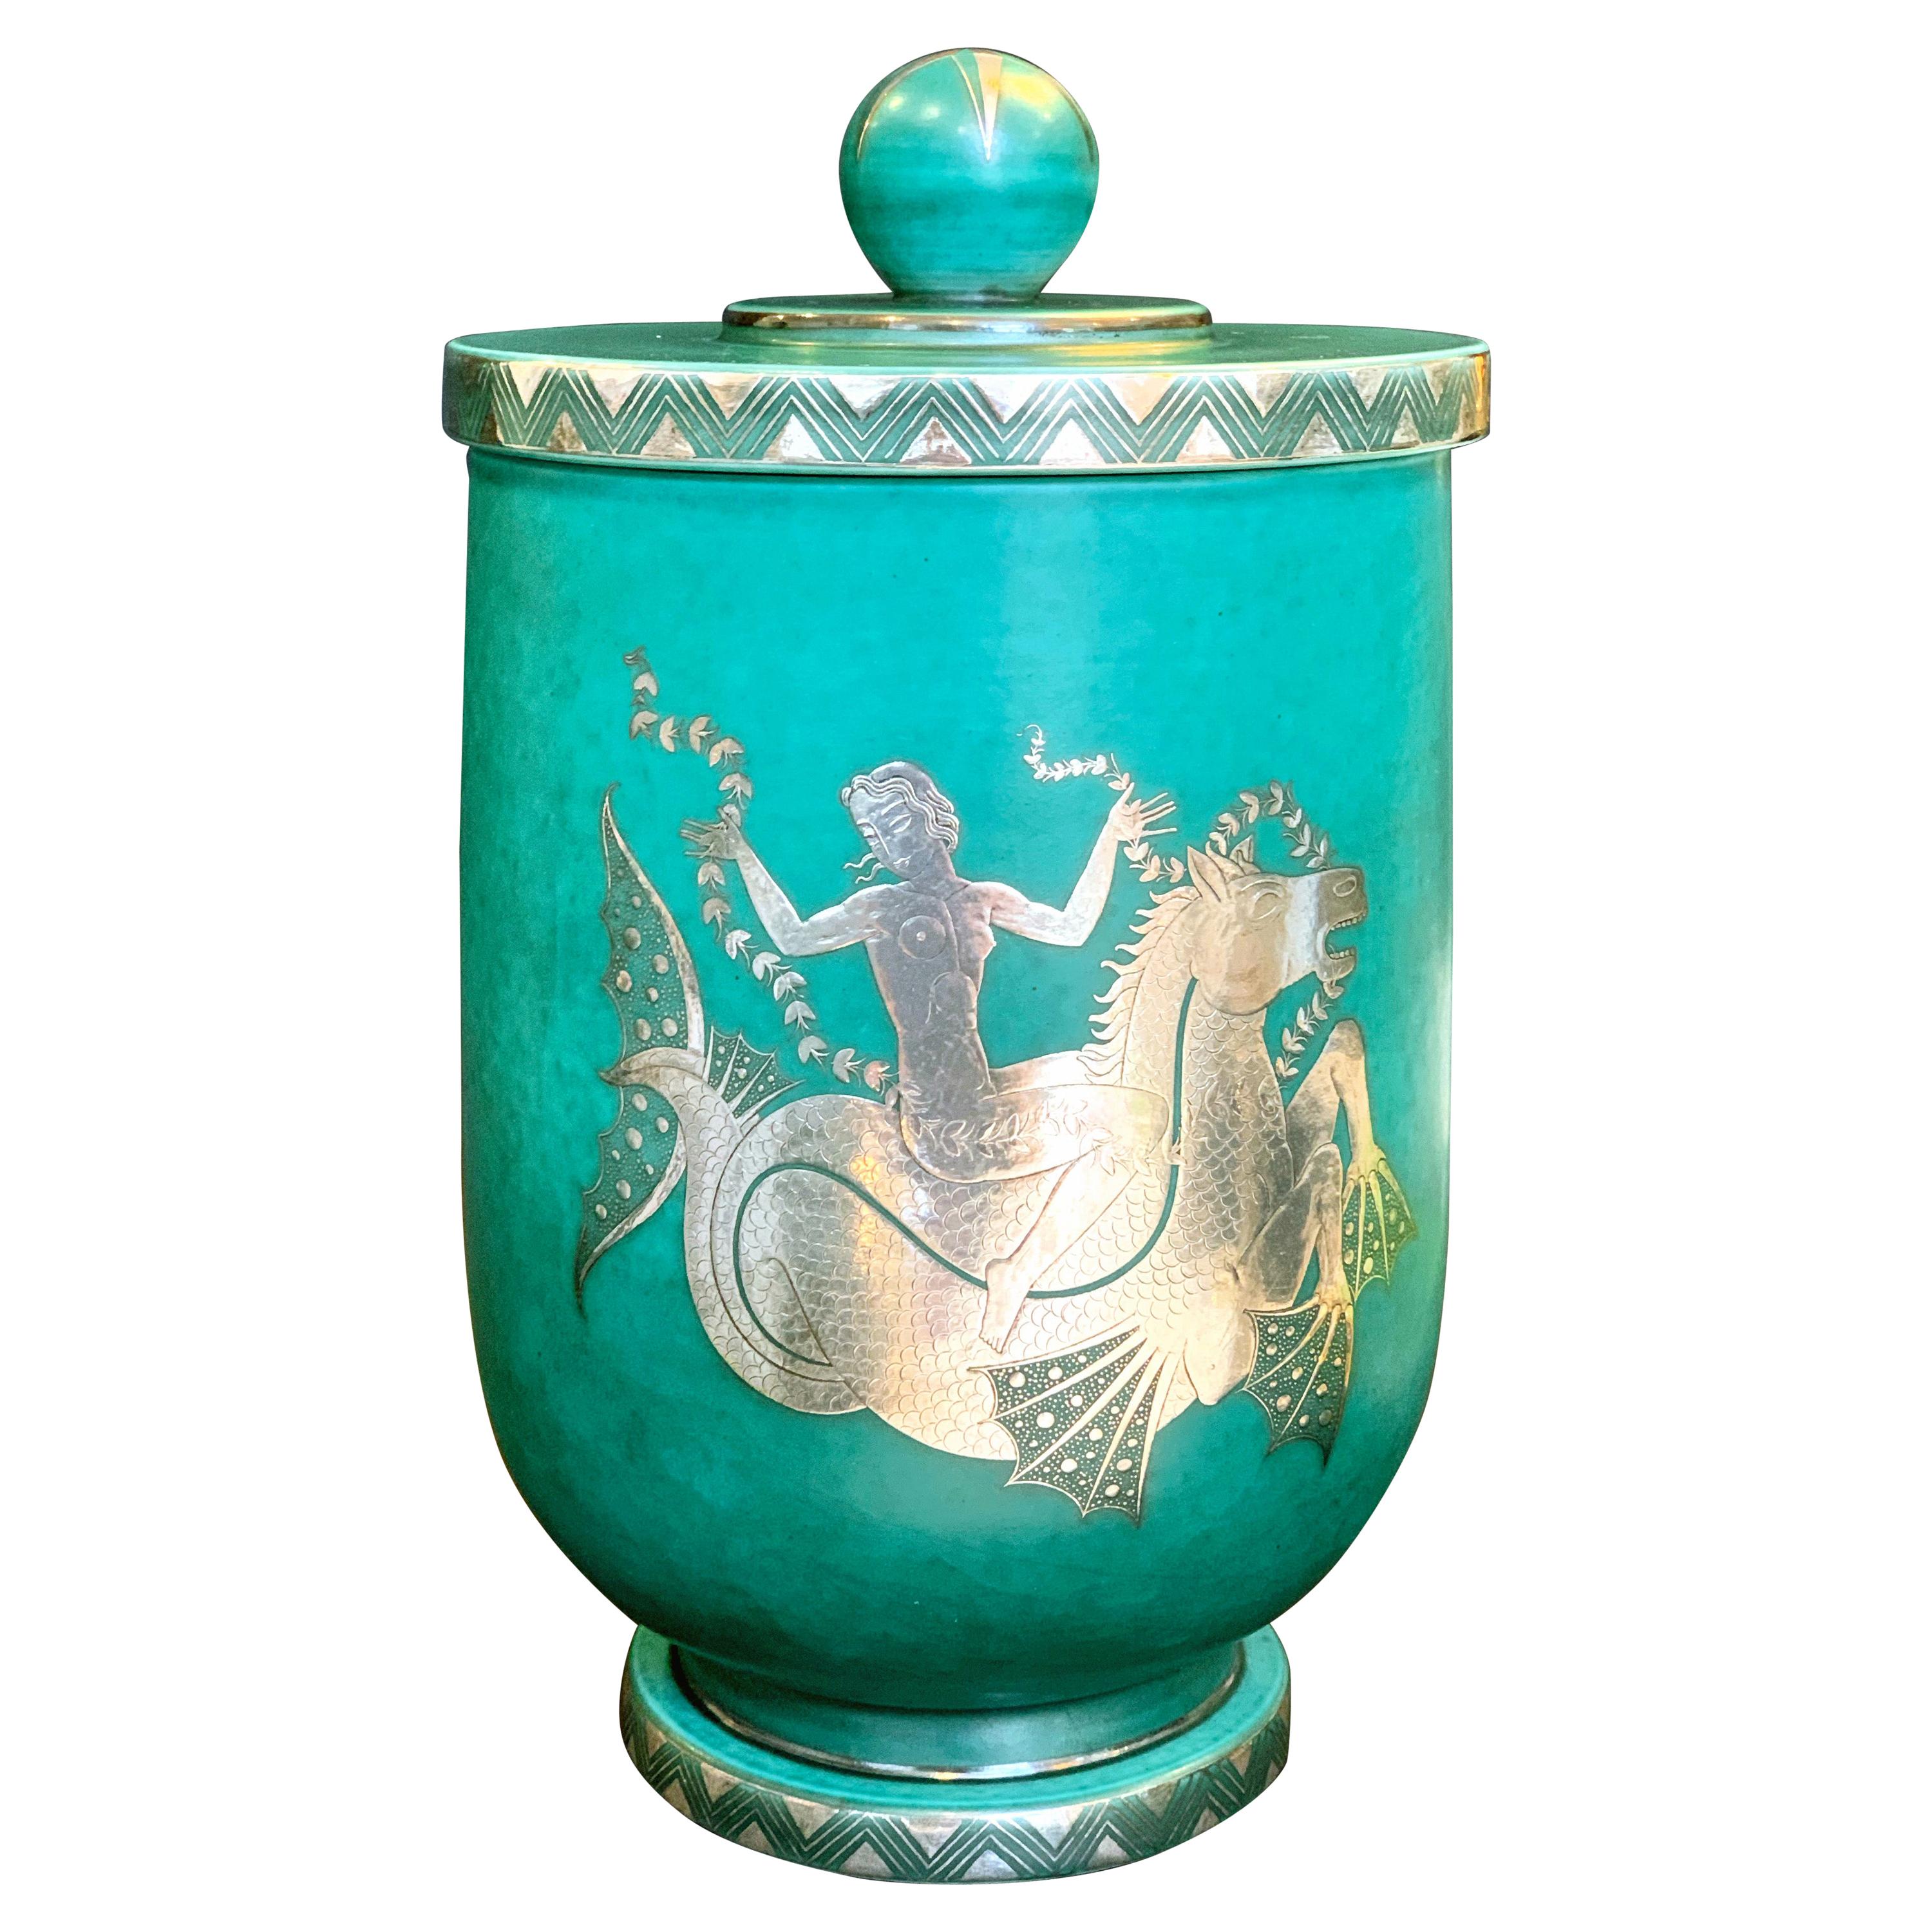 "Mermaid Riding Hippocampus, " Large, Unique Argenta Covered Jar by Gustavsberg